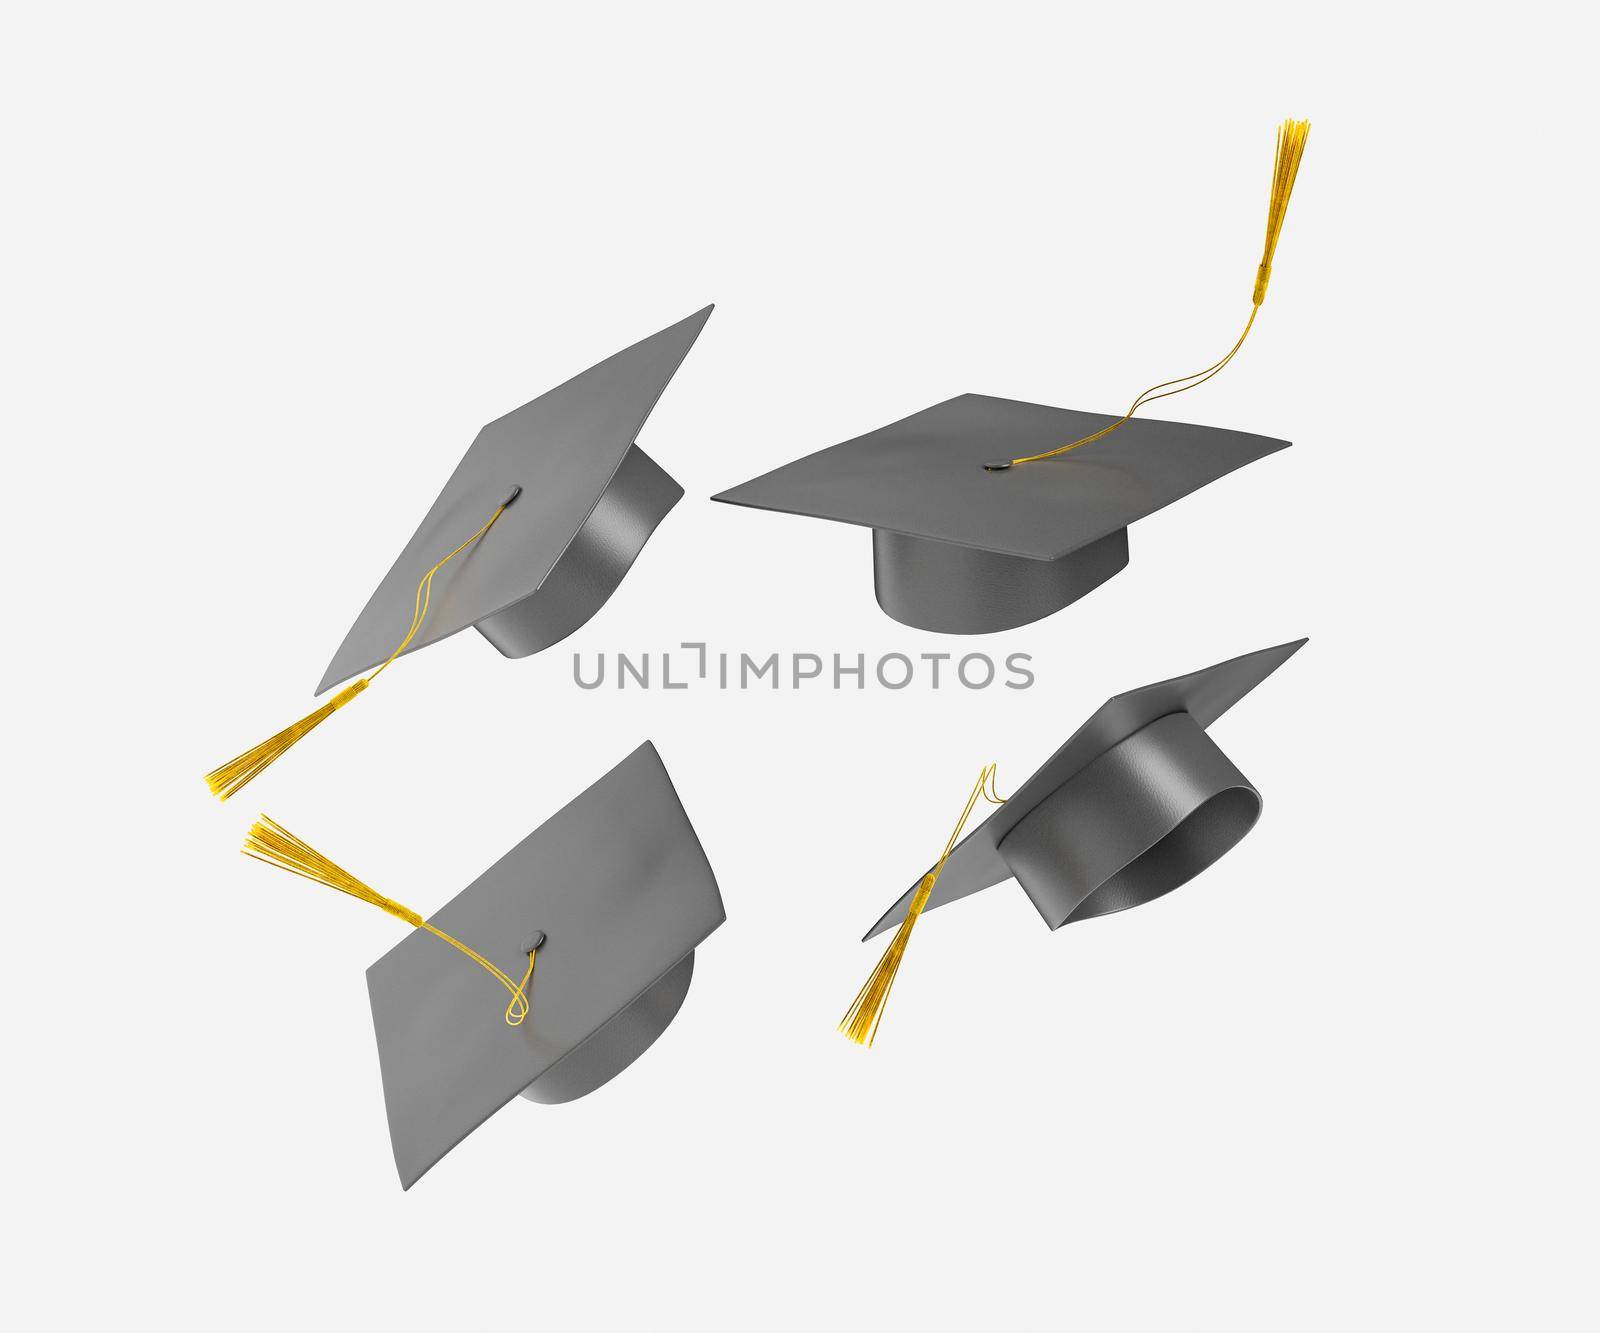 3d illustration of thrown graduation hats during celebration of conferring academic degree or diploma on white background